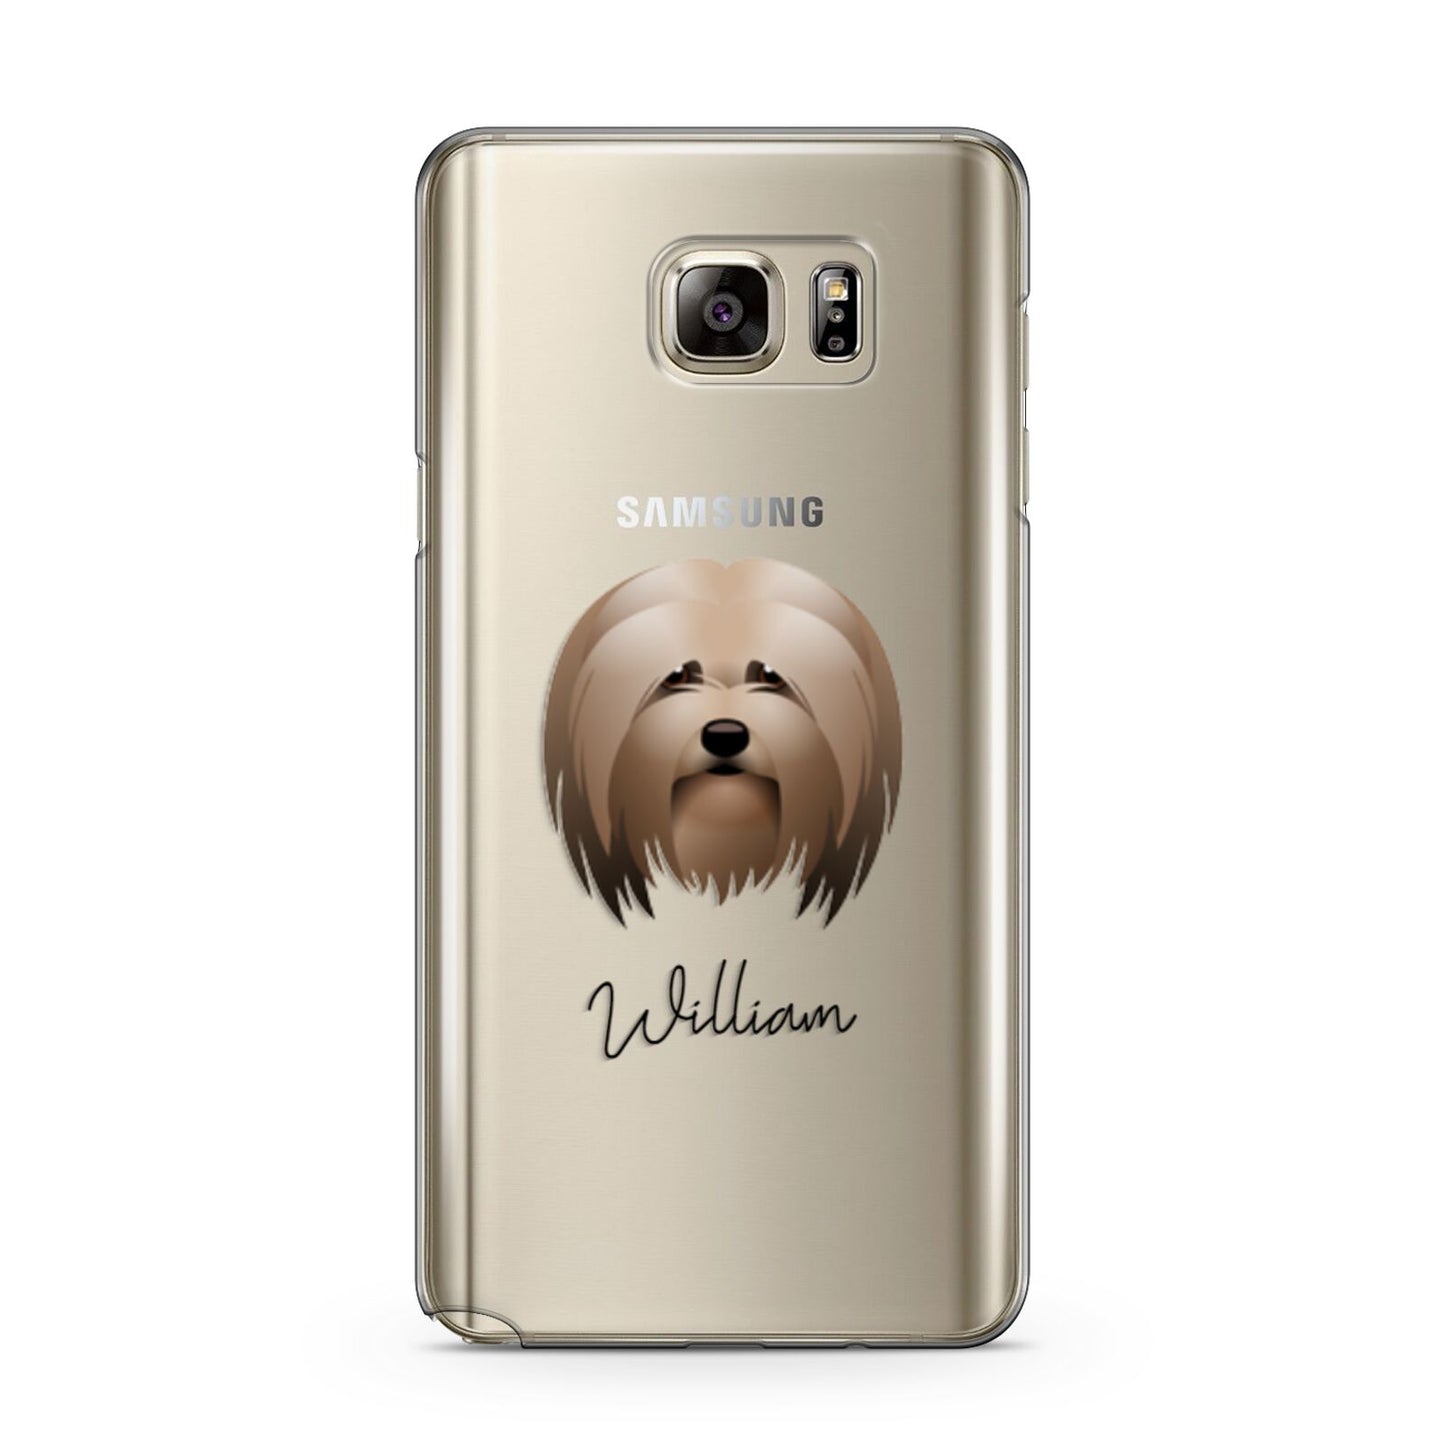 Lhasa Apso Personalised Samsung Galaxy Note 5 Case